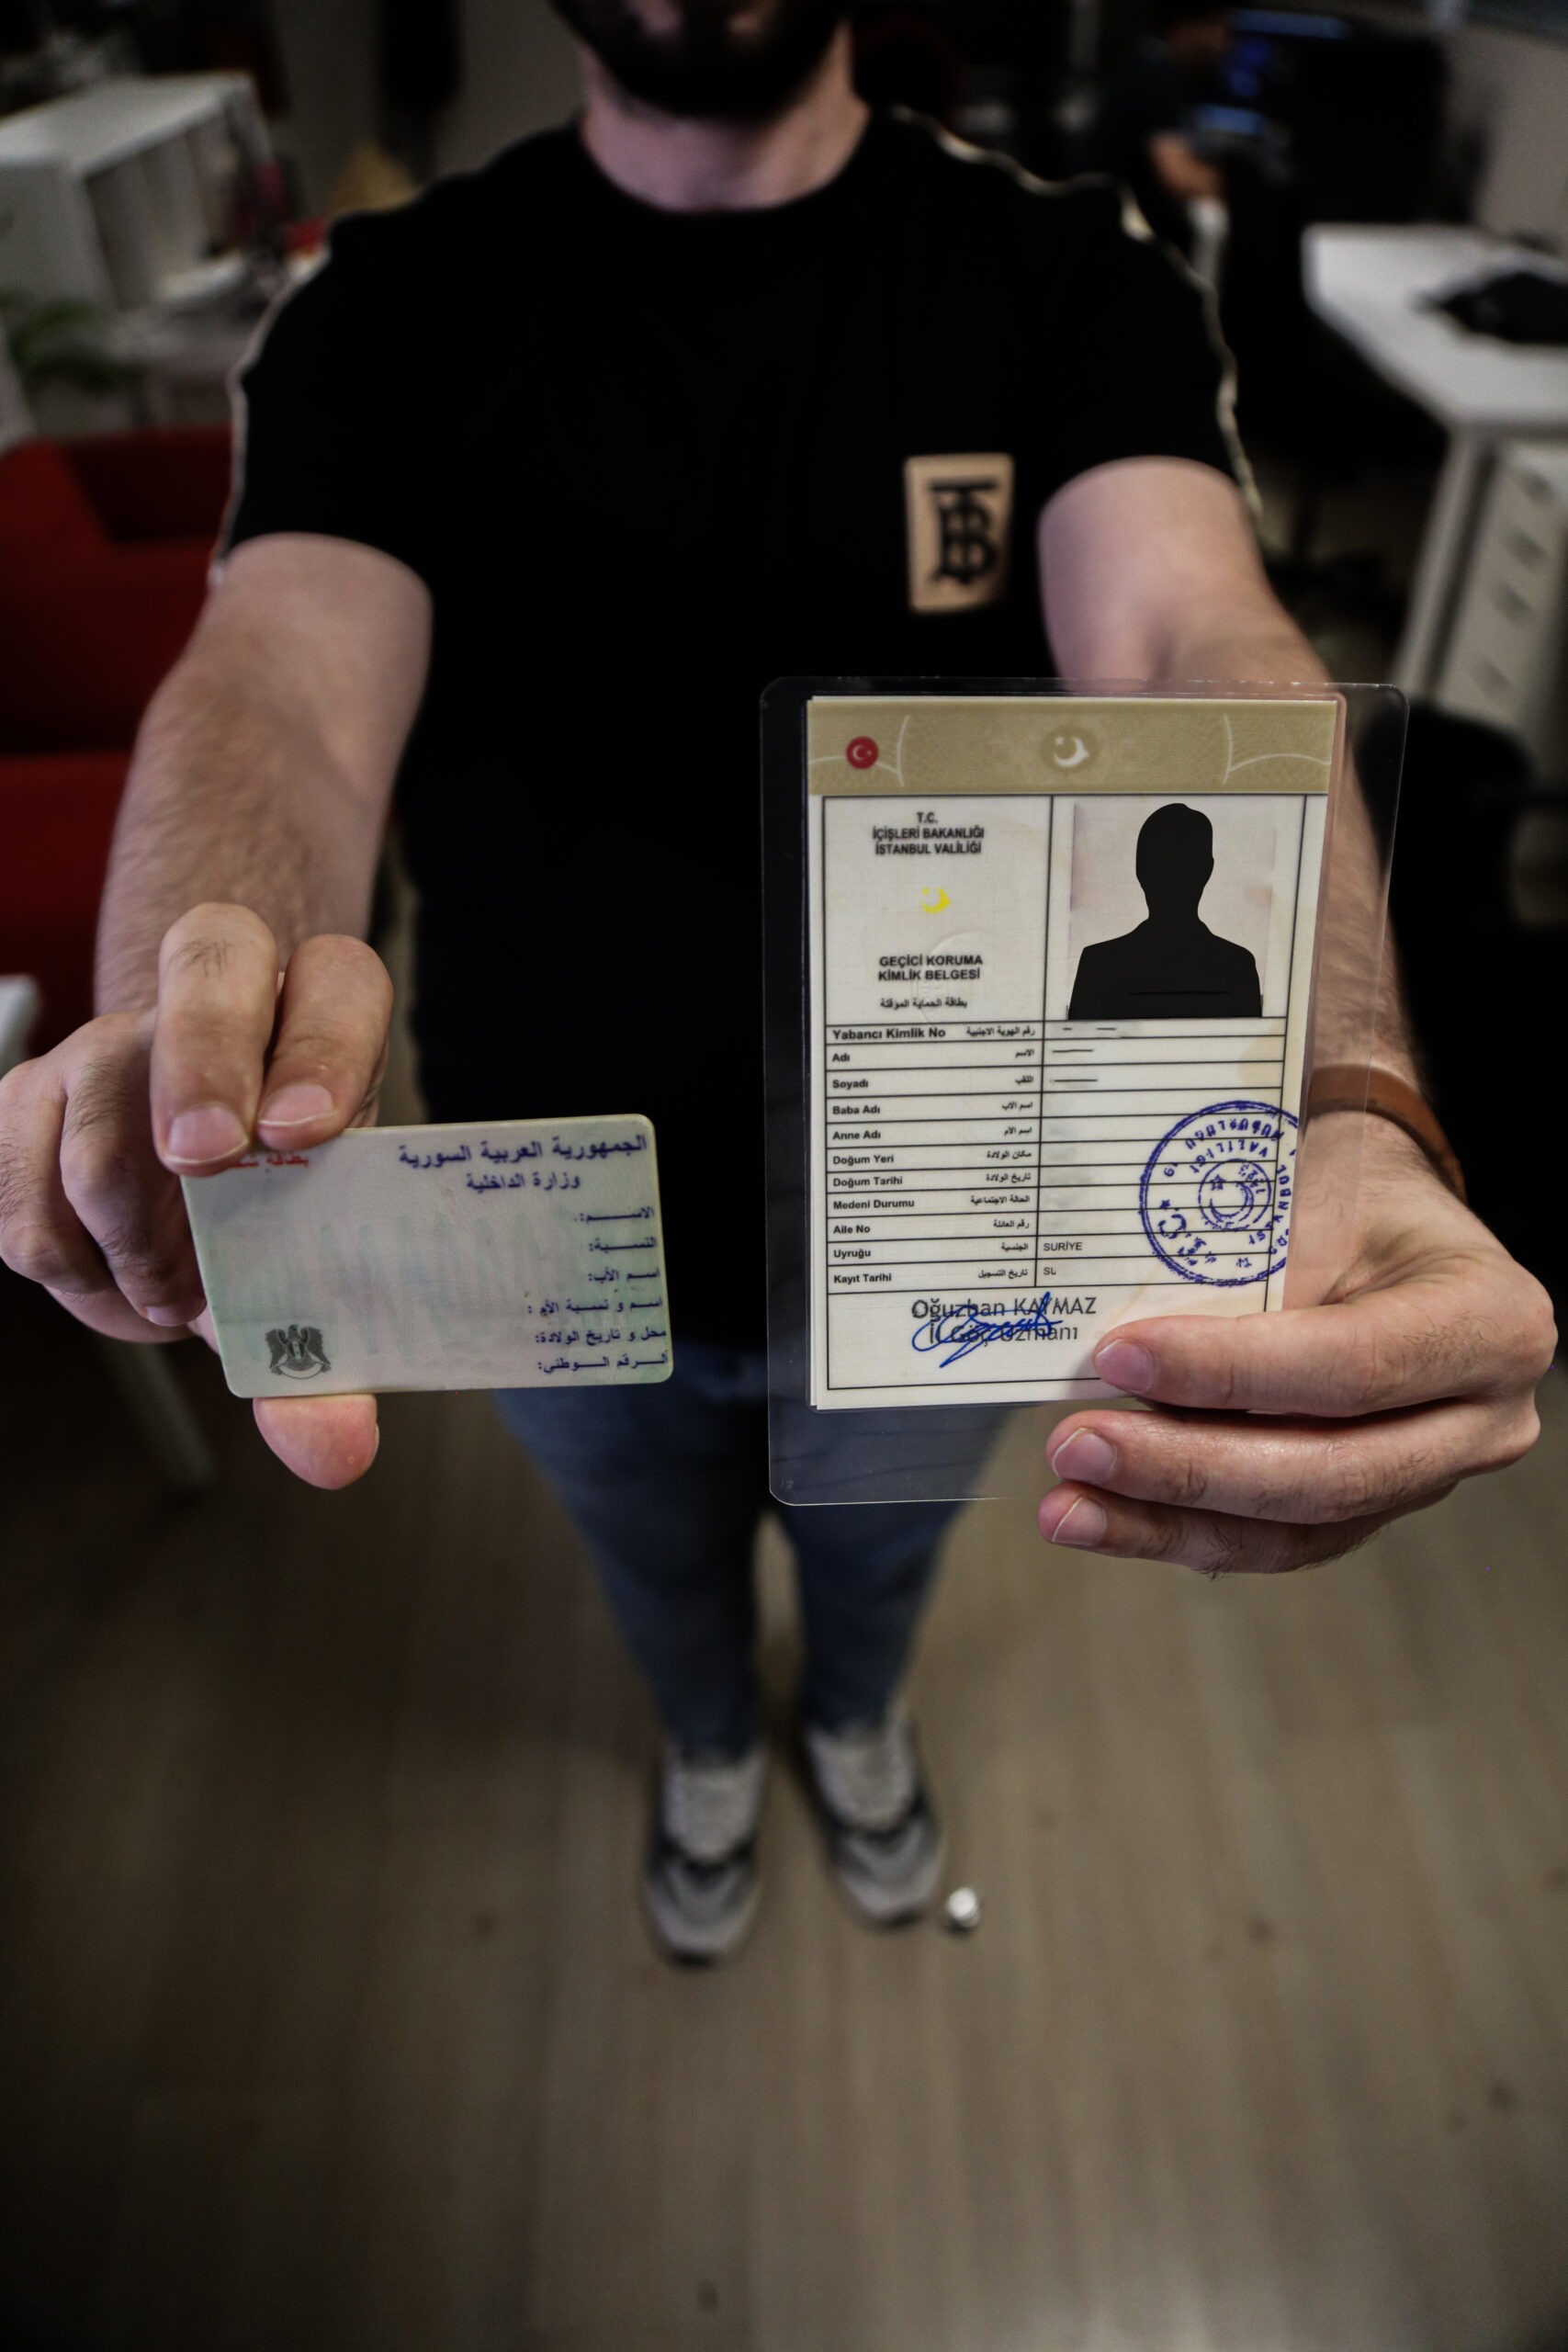 A Syrian refugee holding a temporary protection document (Kimlik) in Turkey and his Syrian identity card - August 11, 2023 (Enab Baladi)